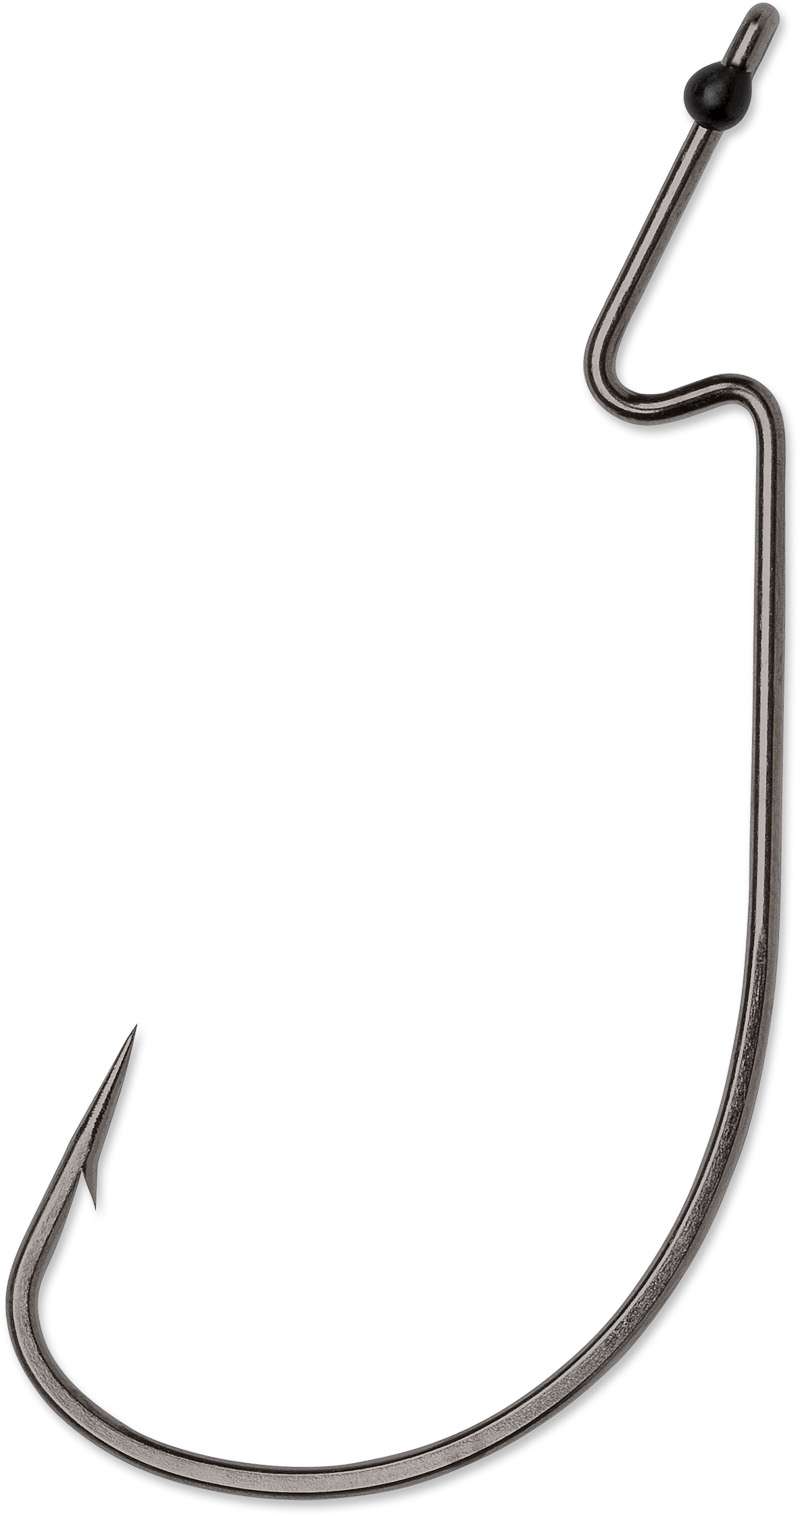 VMC
X-Long Wide Gap
This hook is ideal for plus-size soft plastics with its offset point, extra-long shank and resin-closed eye. Sizes are 3/0, 4/0 and 5/0.